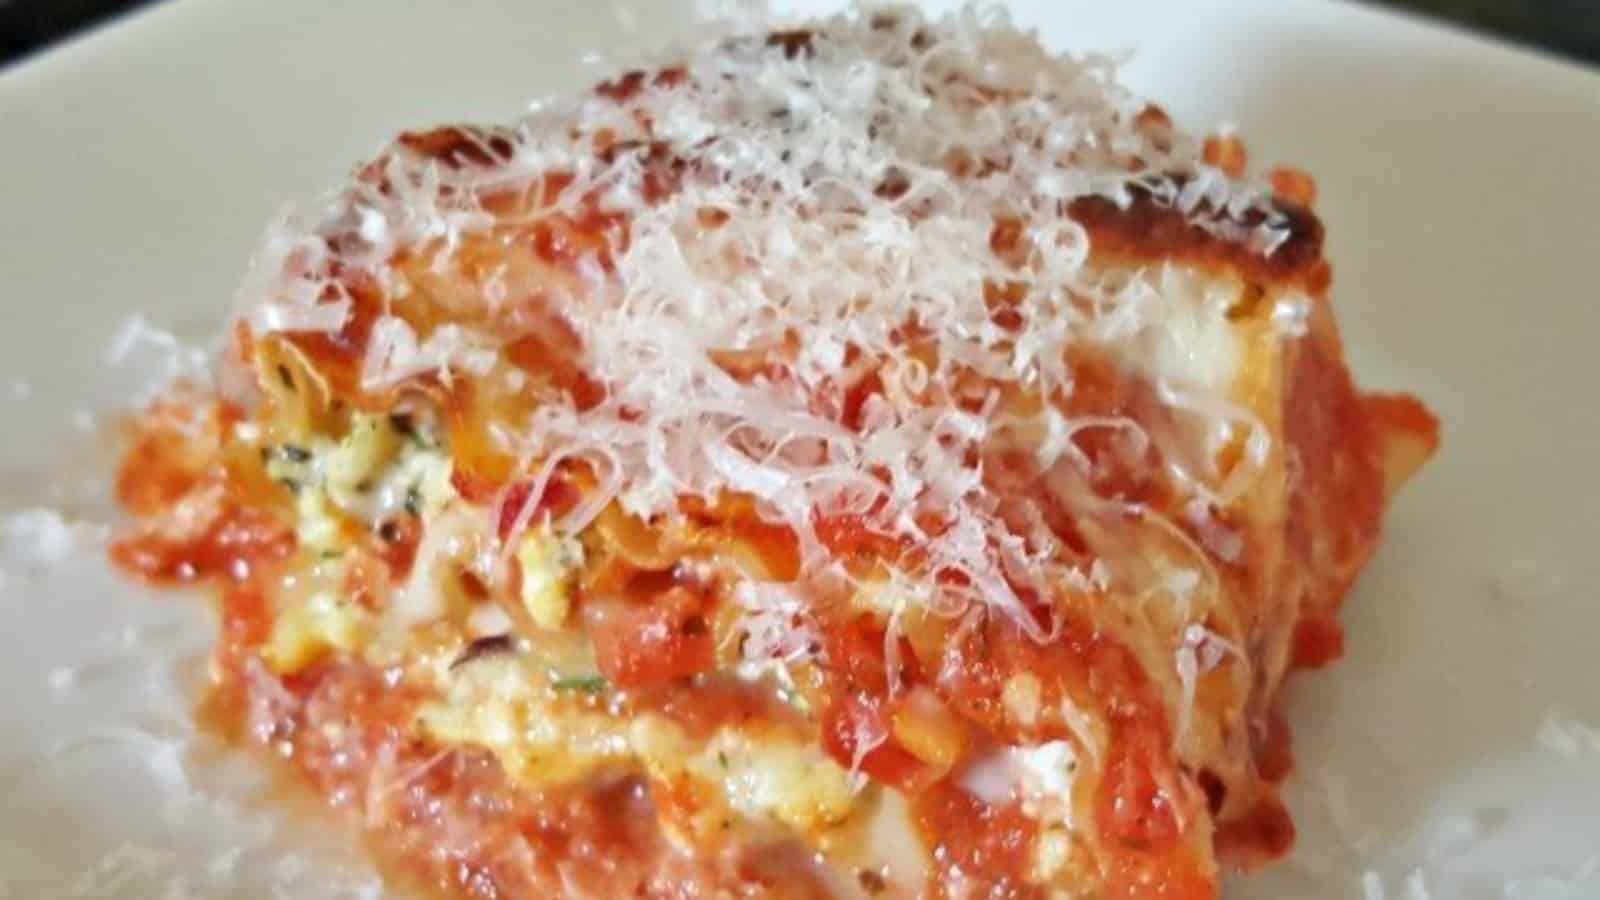 Image shows a lasagna roll up on a white plaet.